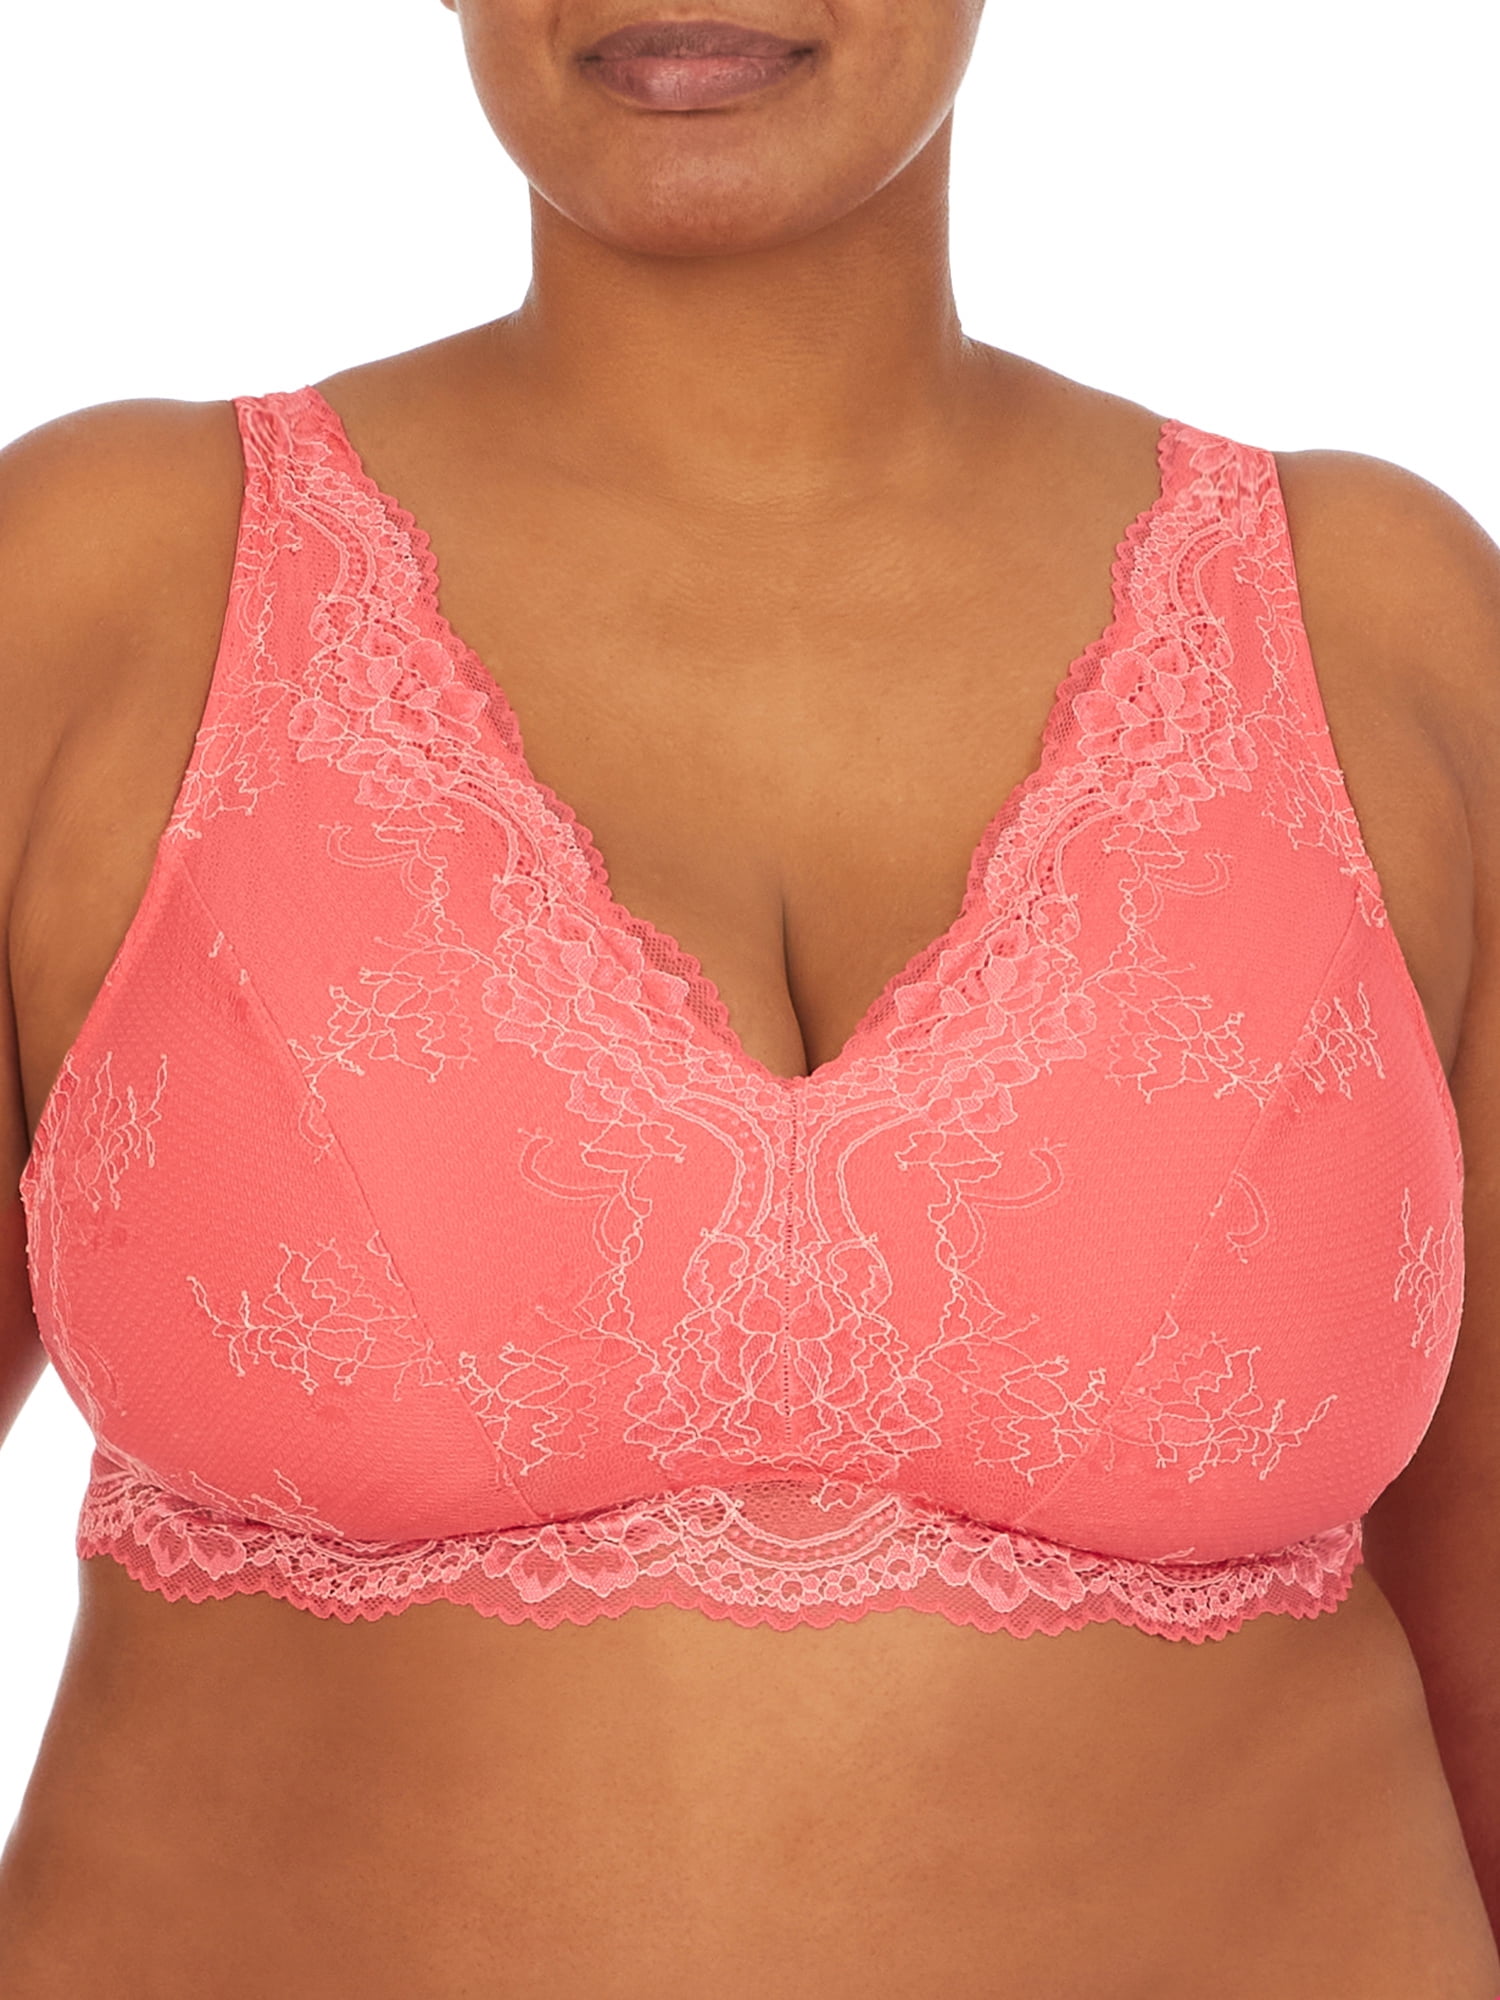 Lacybreasts - Bra Size 46 O on X: Want to buy this lacy bralette